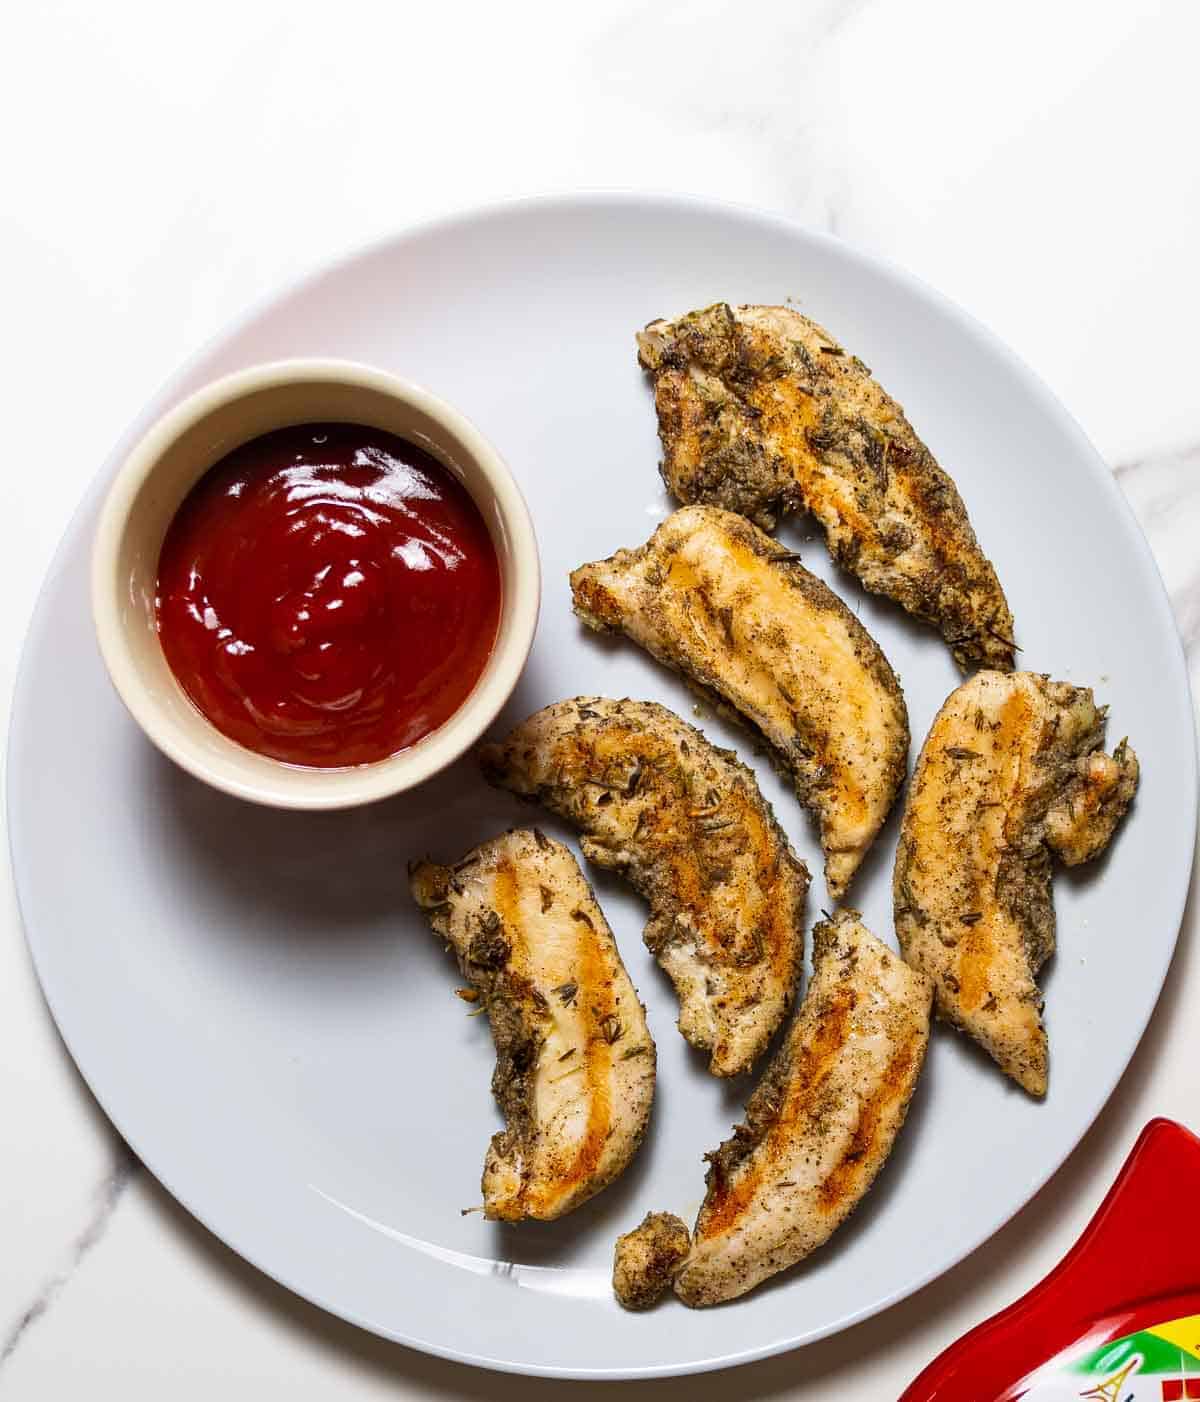         Description: Chicken wings with ketchup on a plate. This delectable dish features chicken wings cooked to perfection and topped with savory ketchup. Whether you're looking for chicken tender recipes or simply